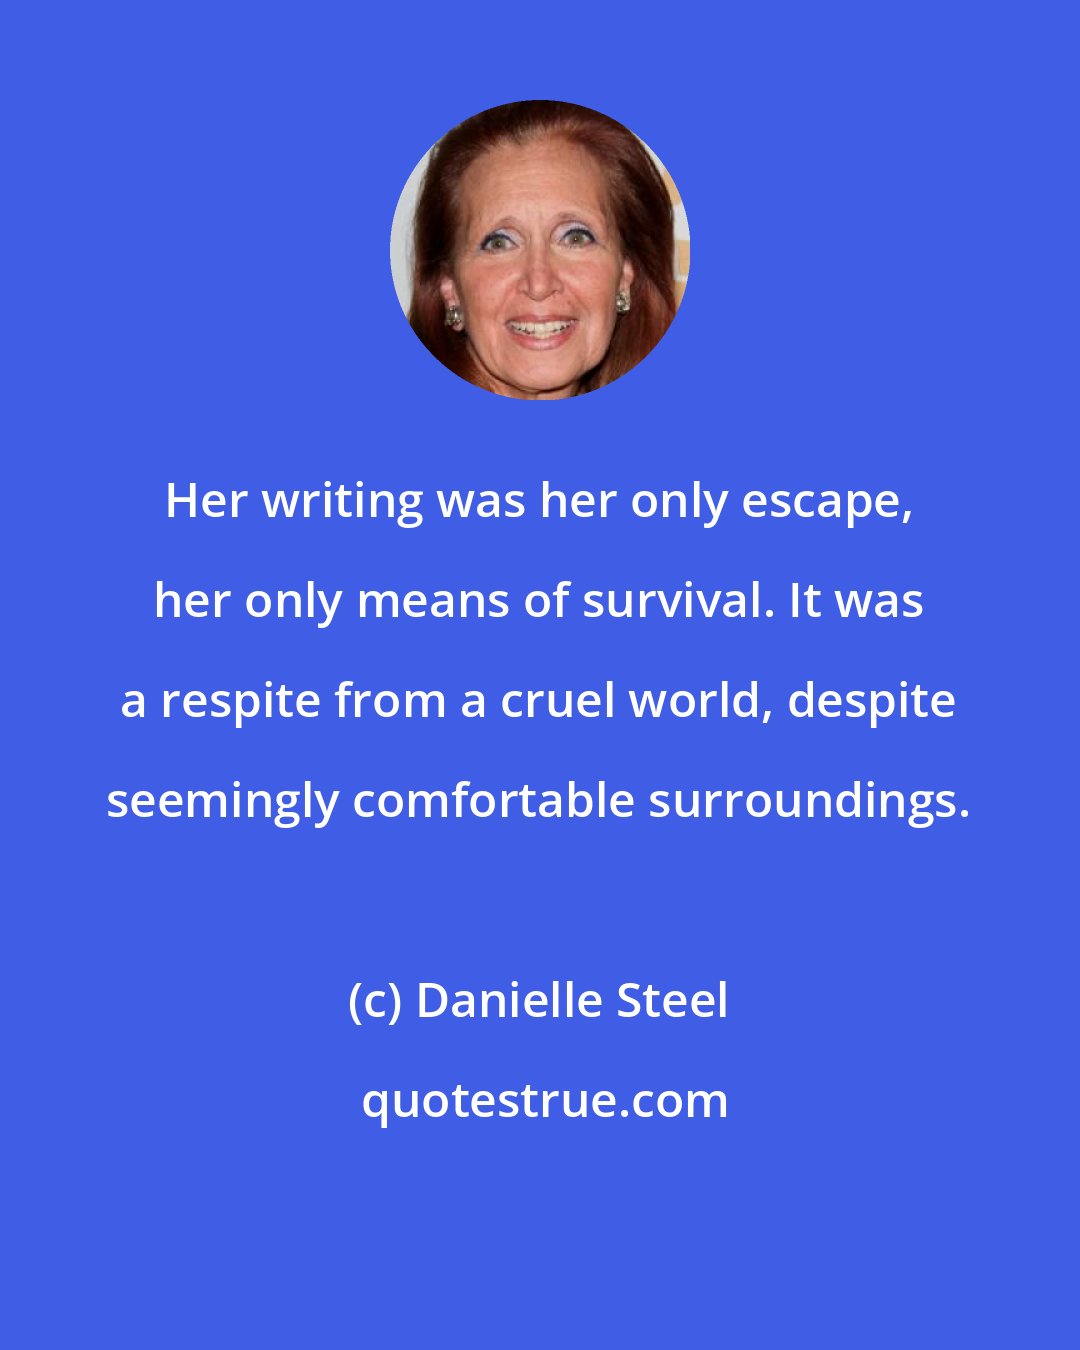 Danielle Steel: Her writing was her only escape, her only means of survival. It was a respite from a cruel world, despite seemingly comfortable surroundings.